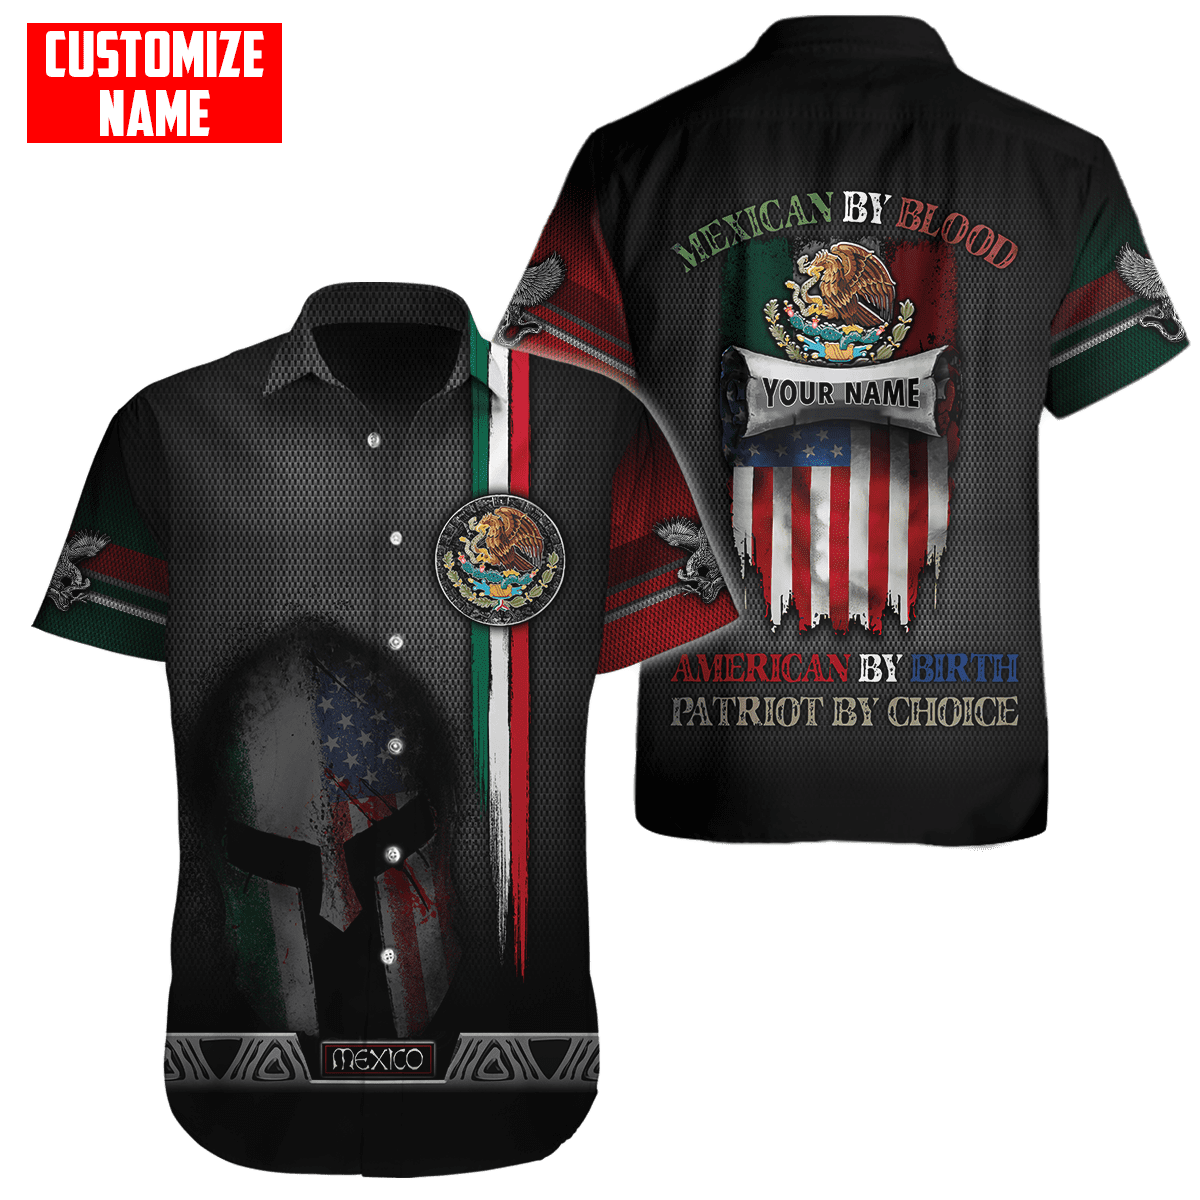 Customized Name Mexico 3D All Over Printed Unisex Shirts